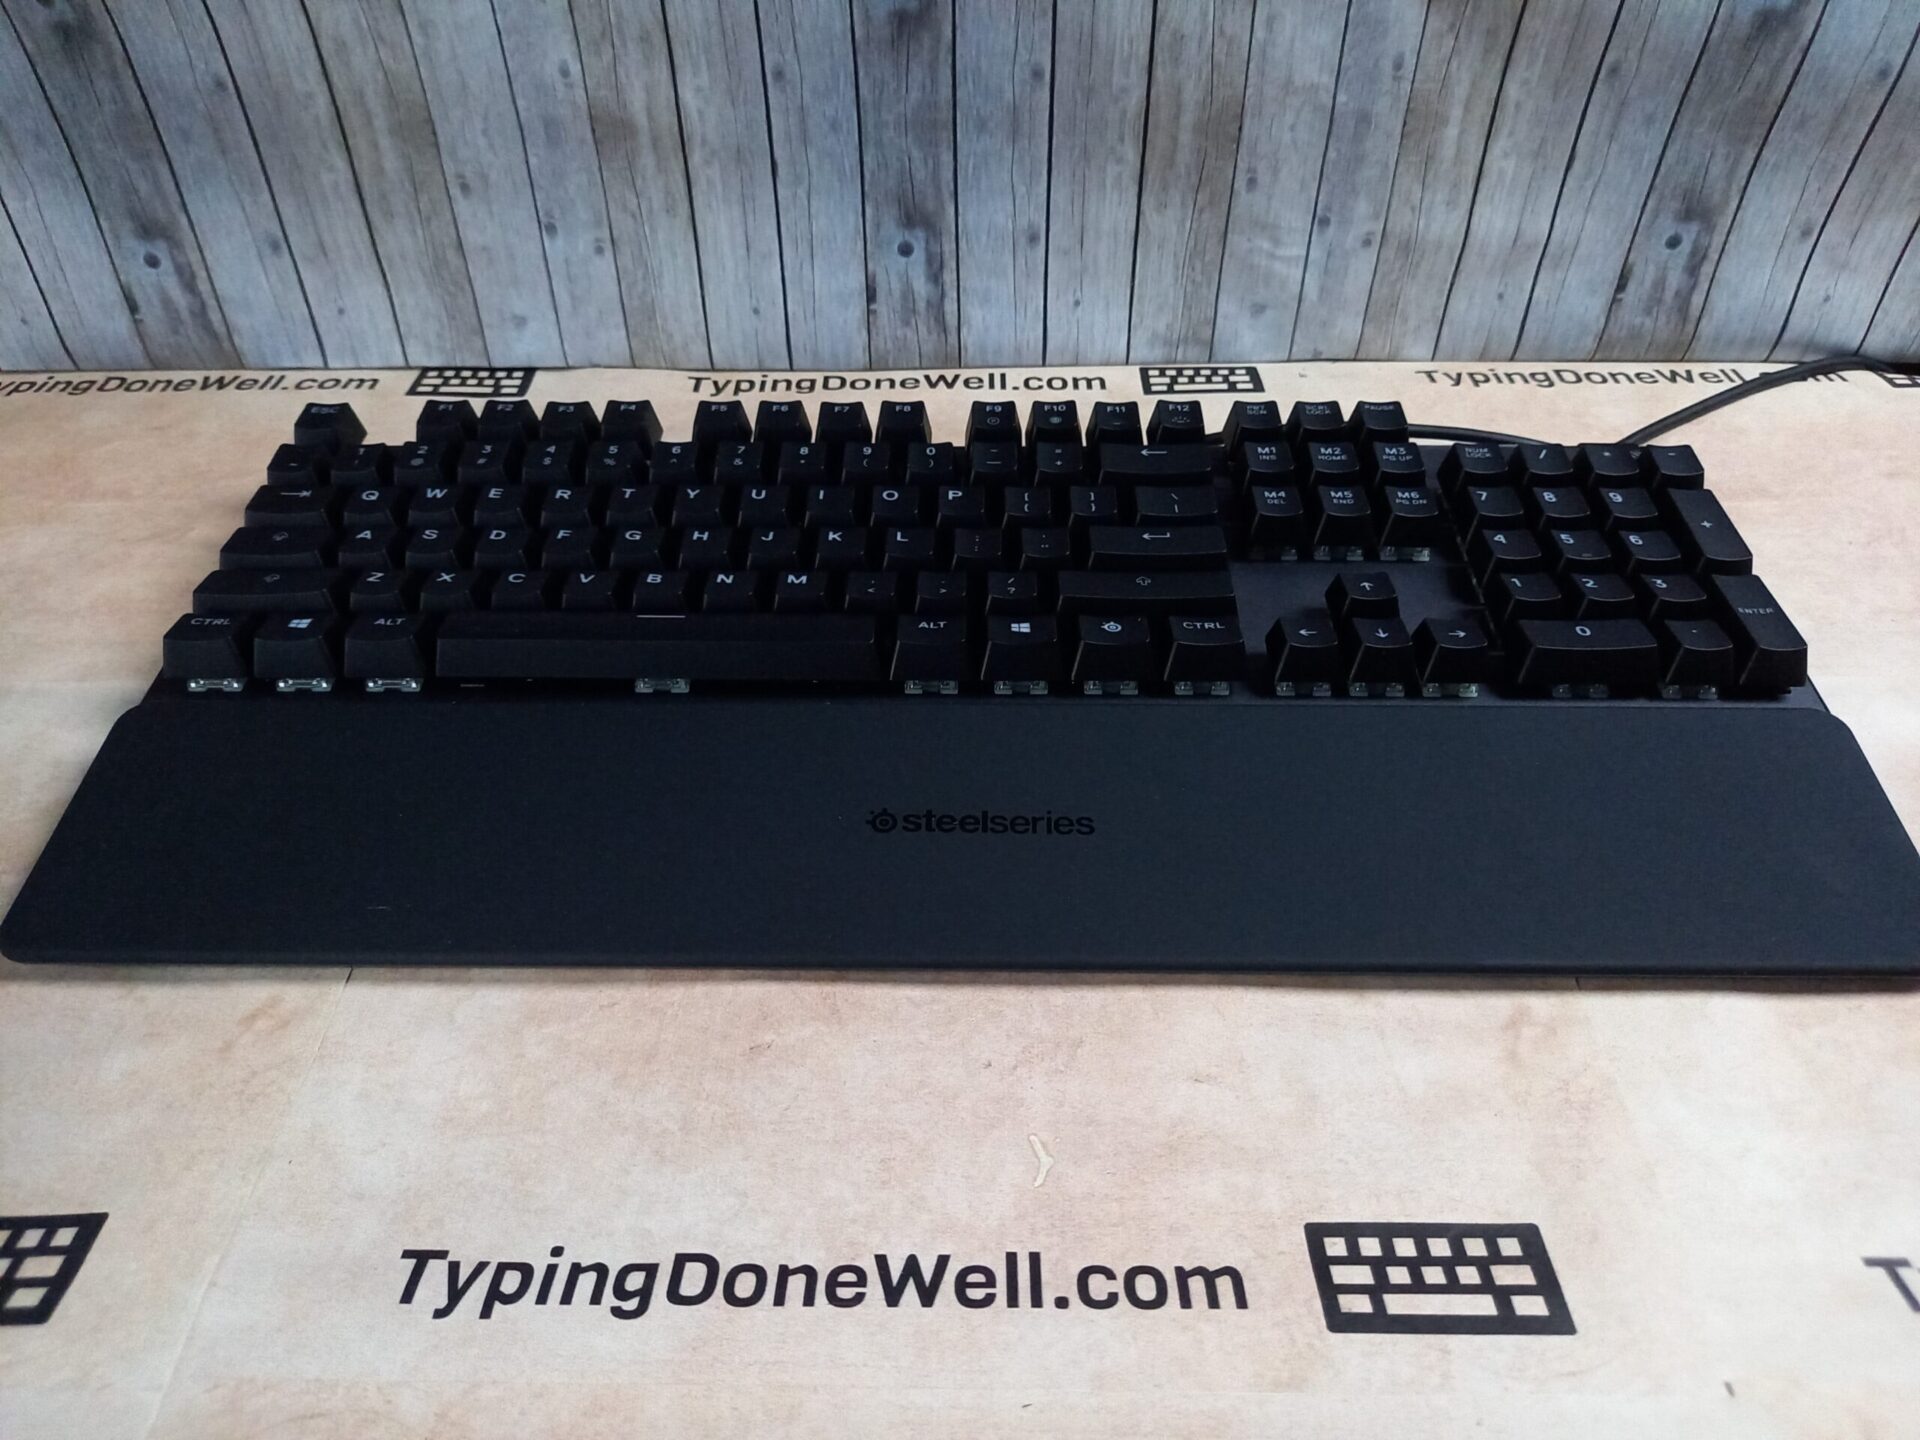 SteelSeries Apex Pro TKL Wireless keyboard review: An expensive let-down